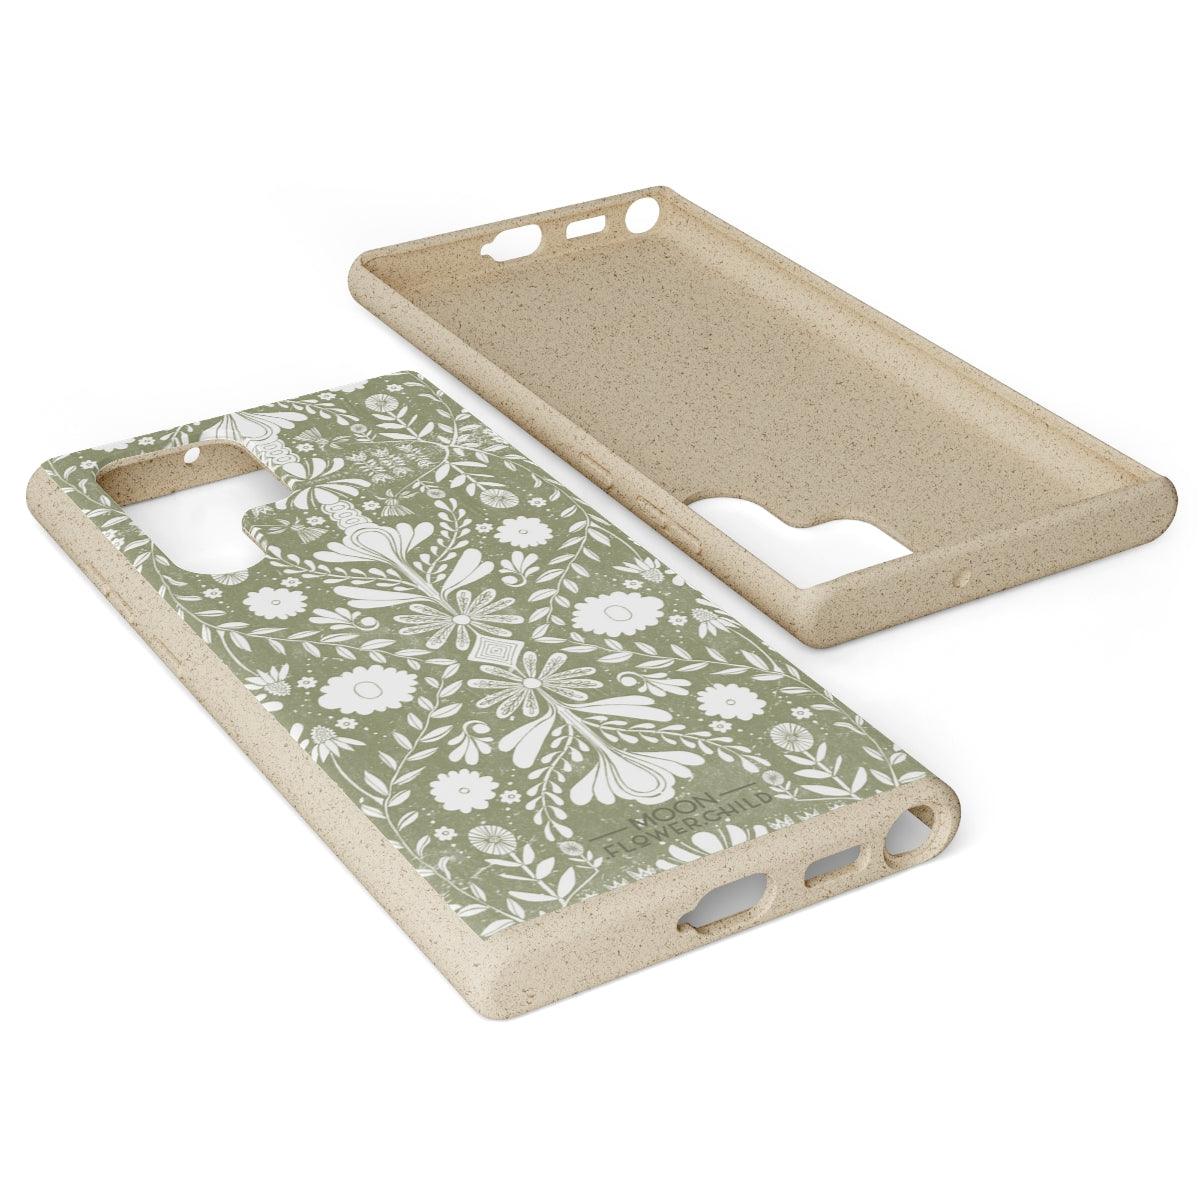 Biodegradable Cases [Earth]